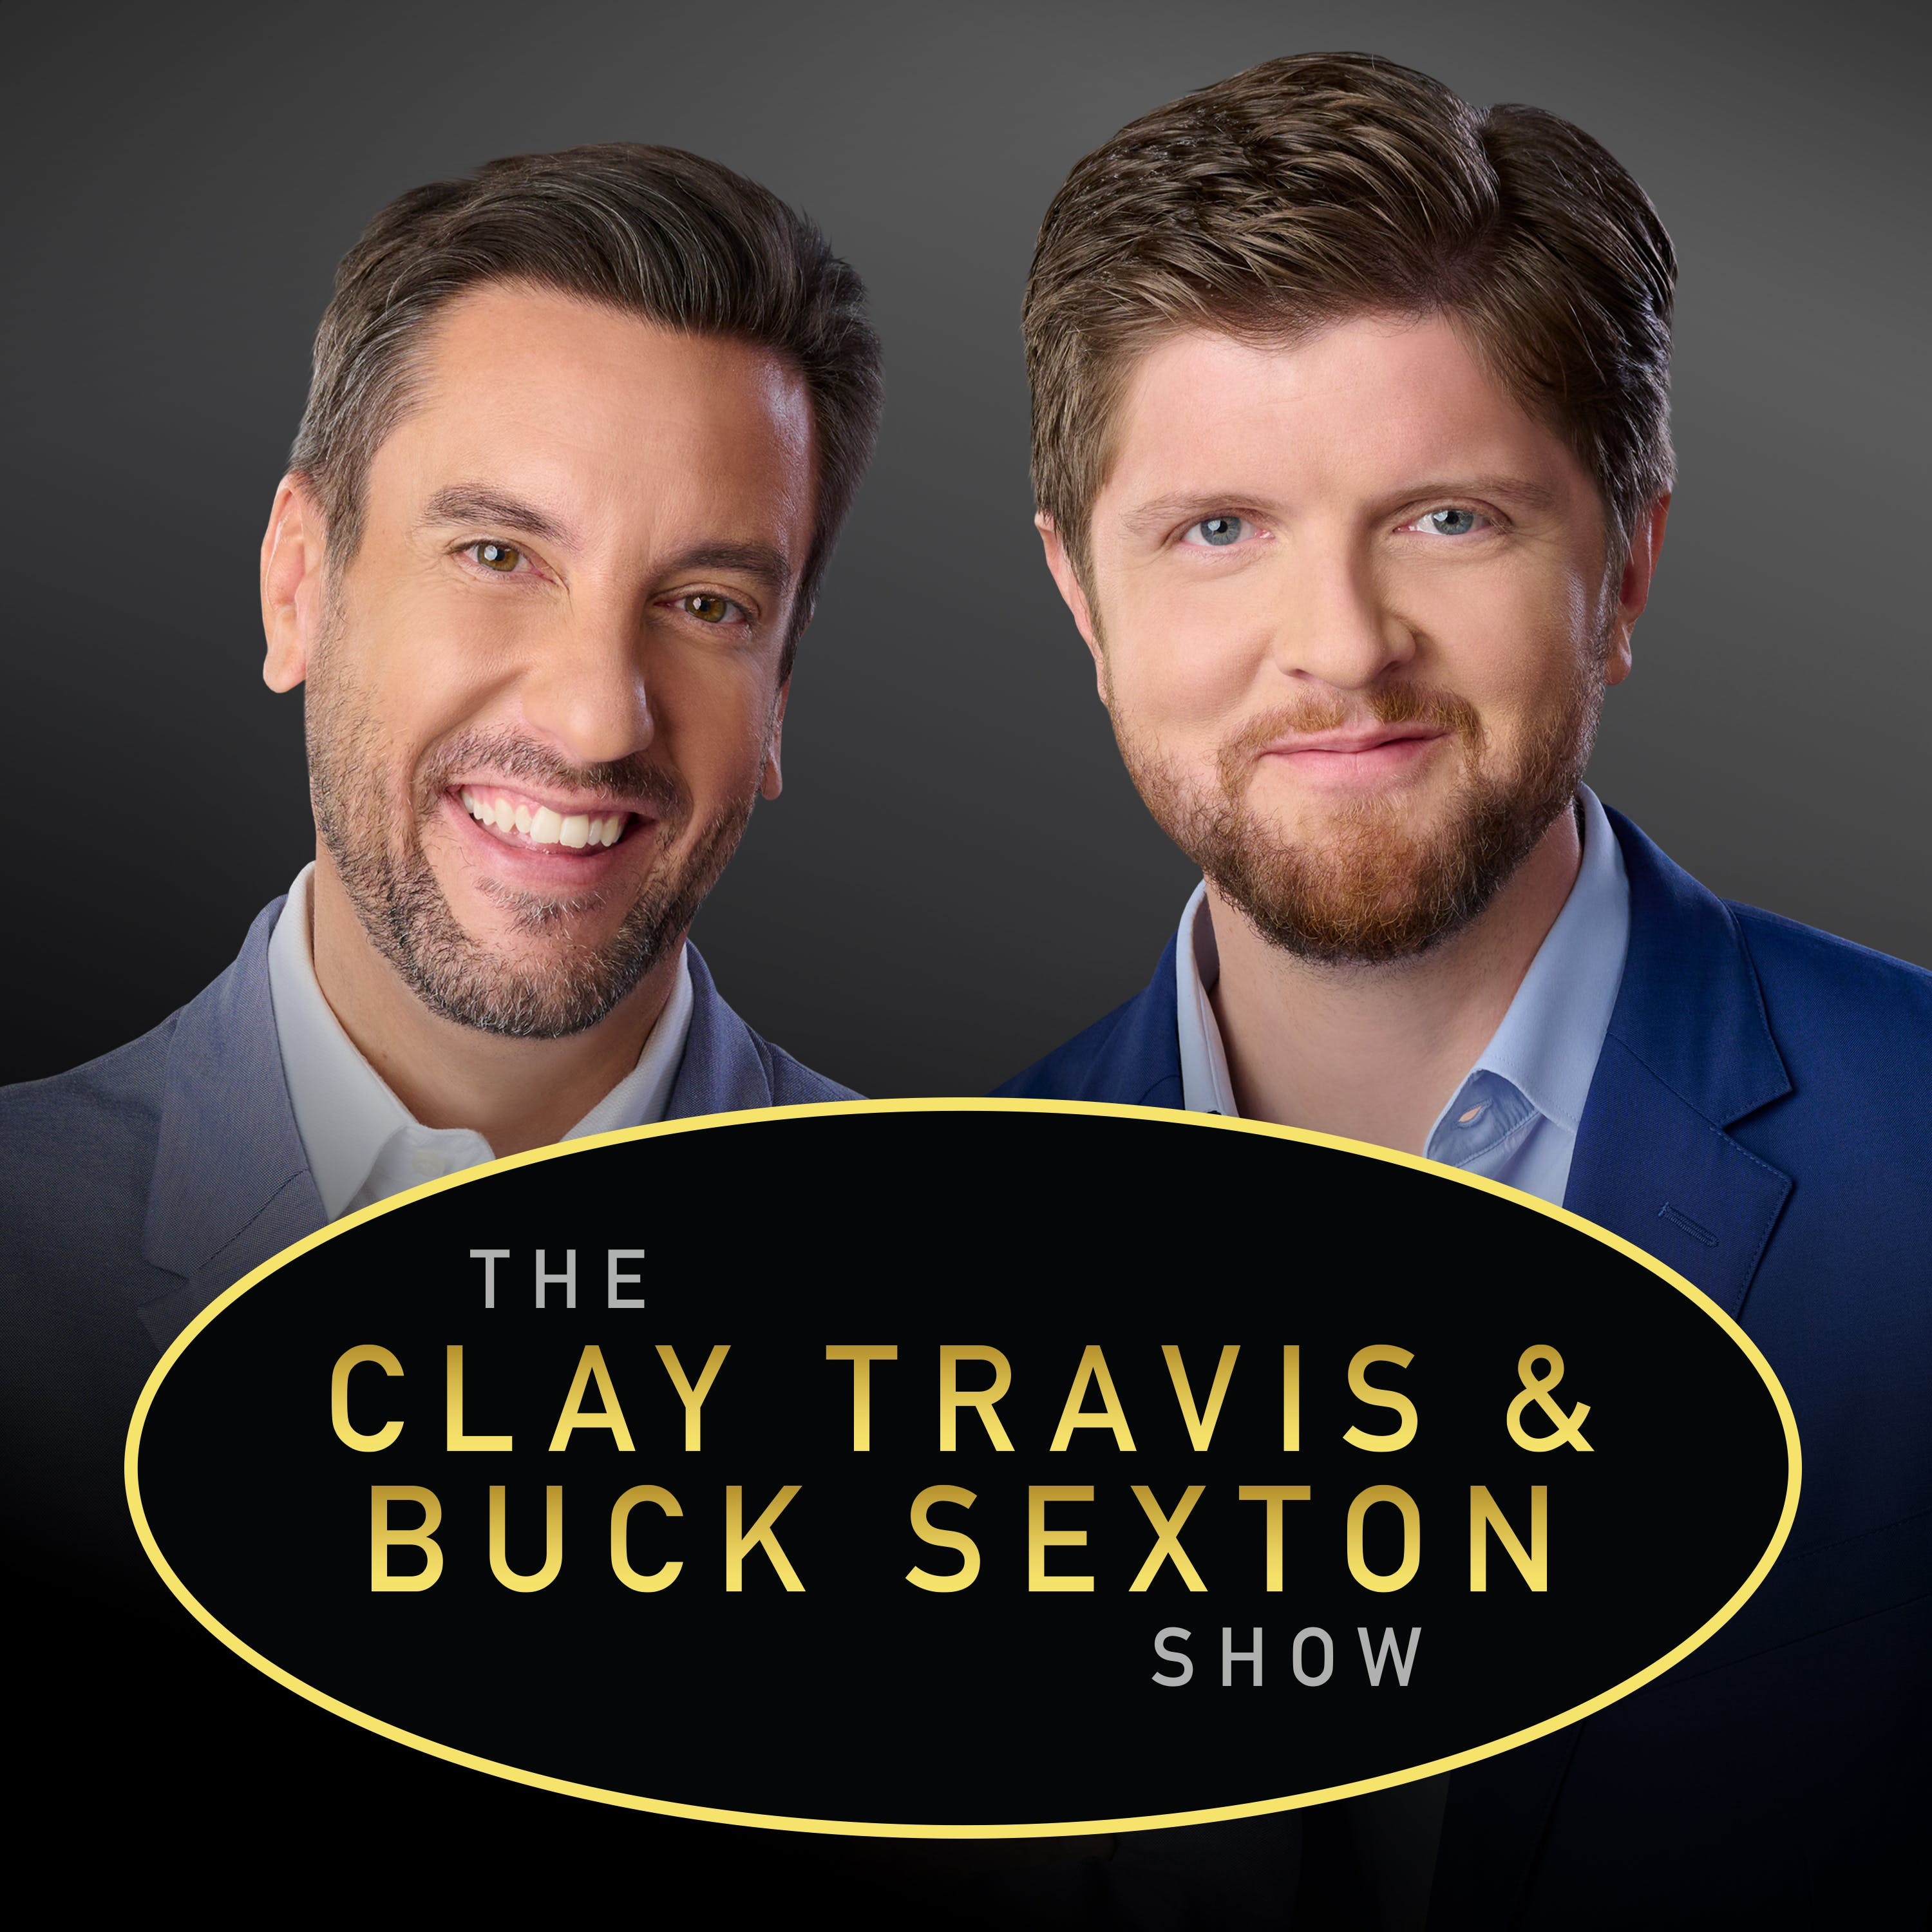 Clay Travis and Buck Sexton Show H1 – Oct 15 2021